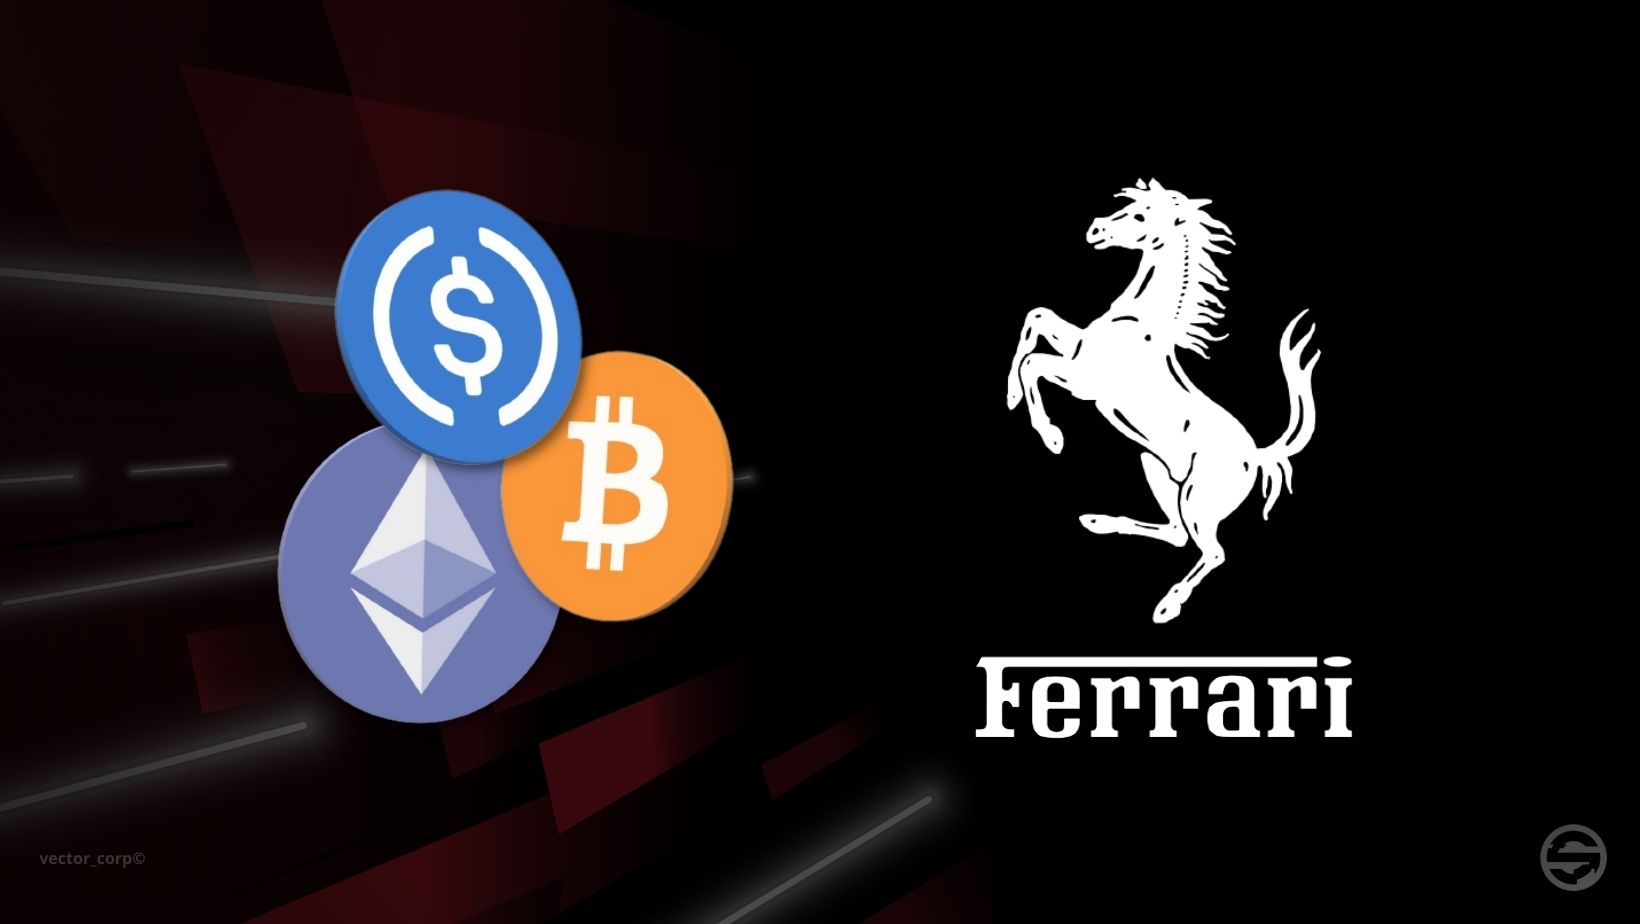 It’s now possible to buy a Ferrari with cryptocurrencies